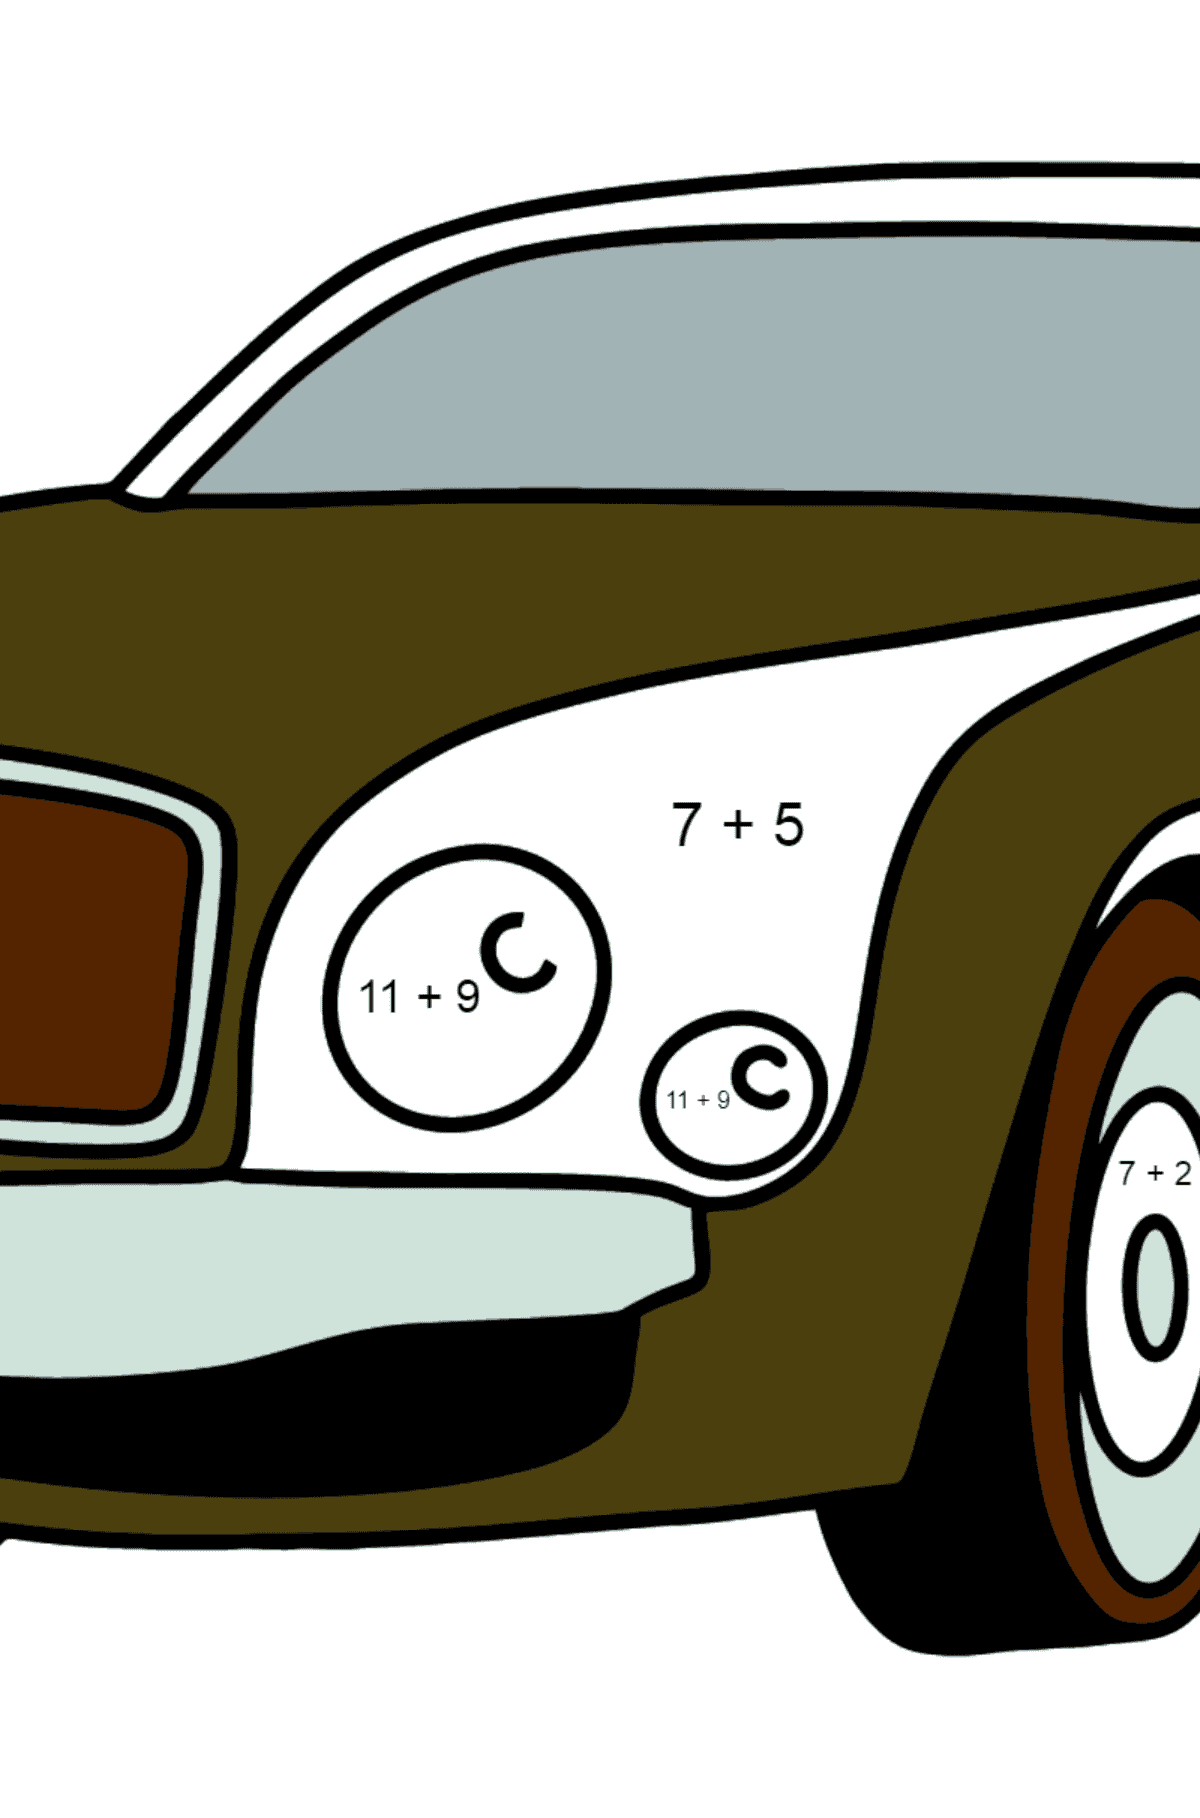 Bentley Car Coloring Page - Math Coloring - Addition for Kids